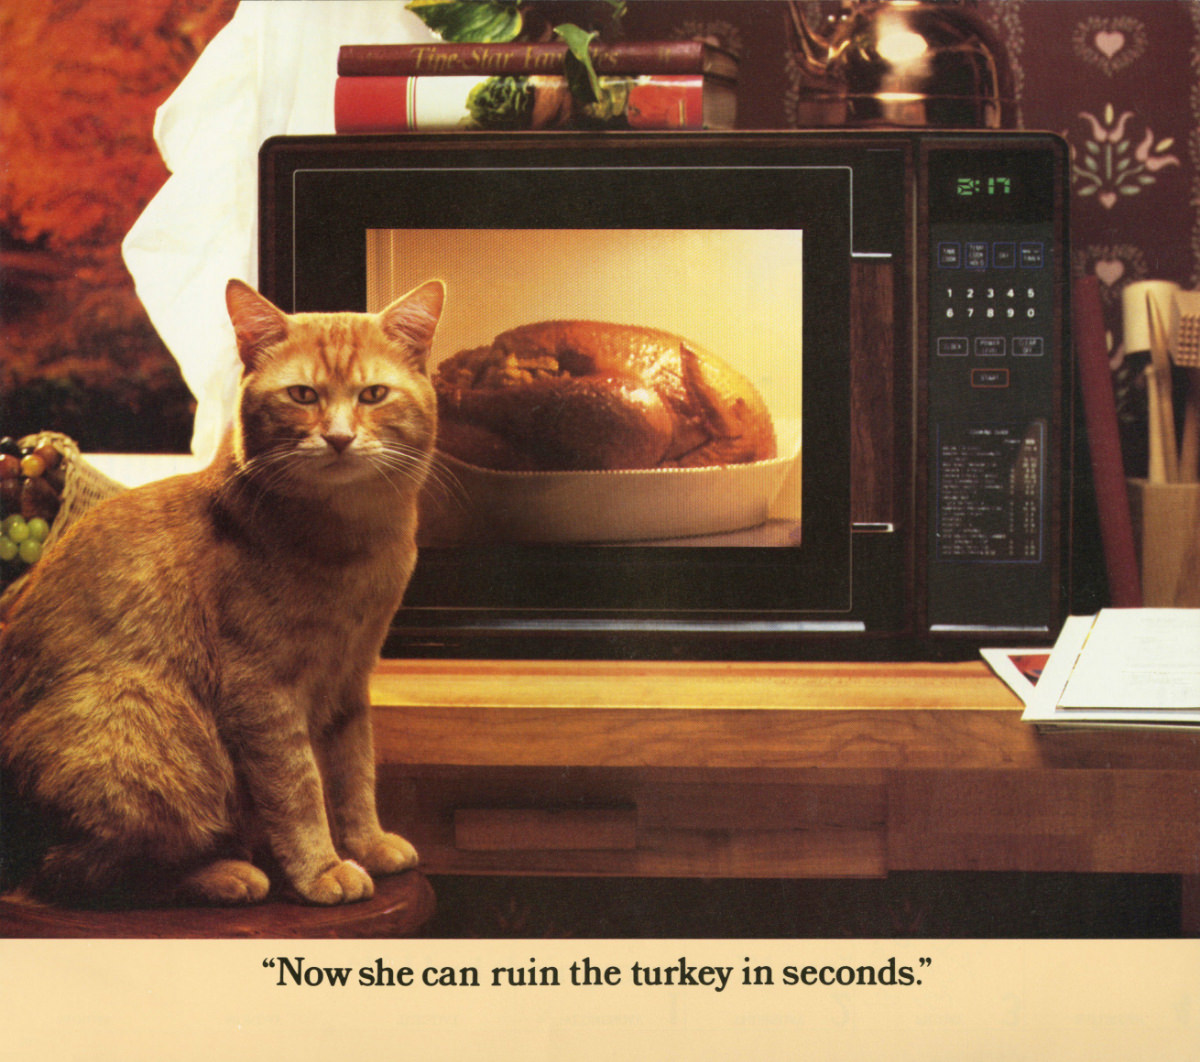 The 1986 Morris Calendar featuring the World's Most Finicky Cat